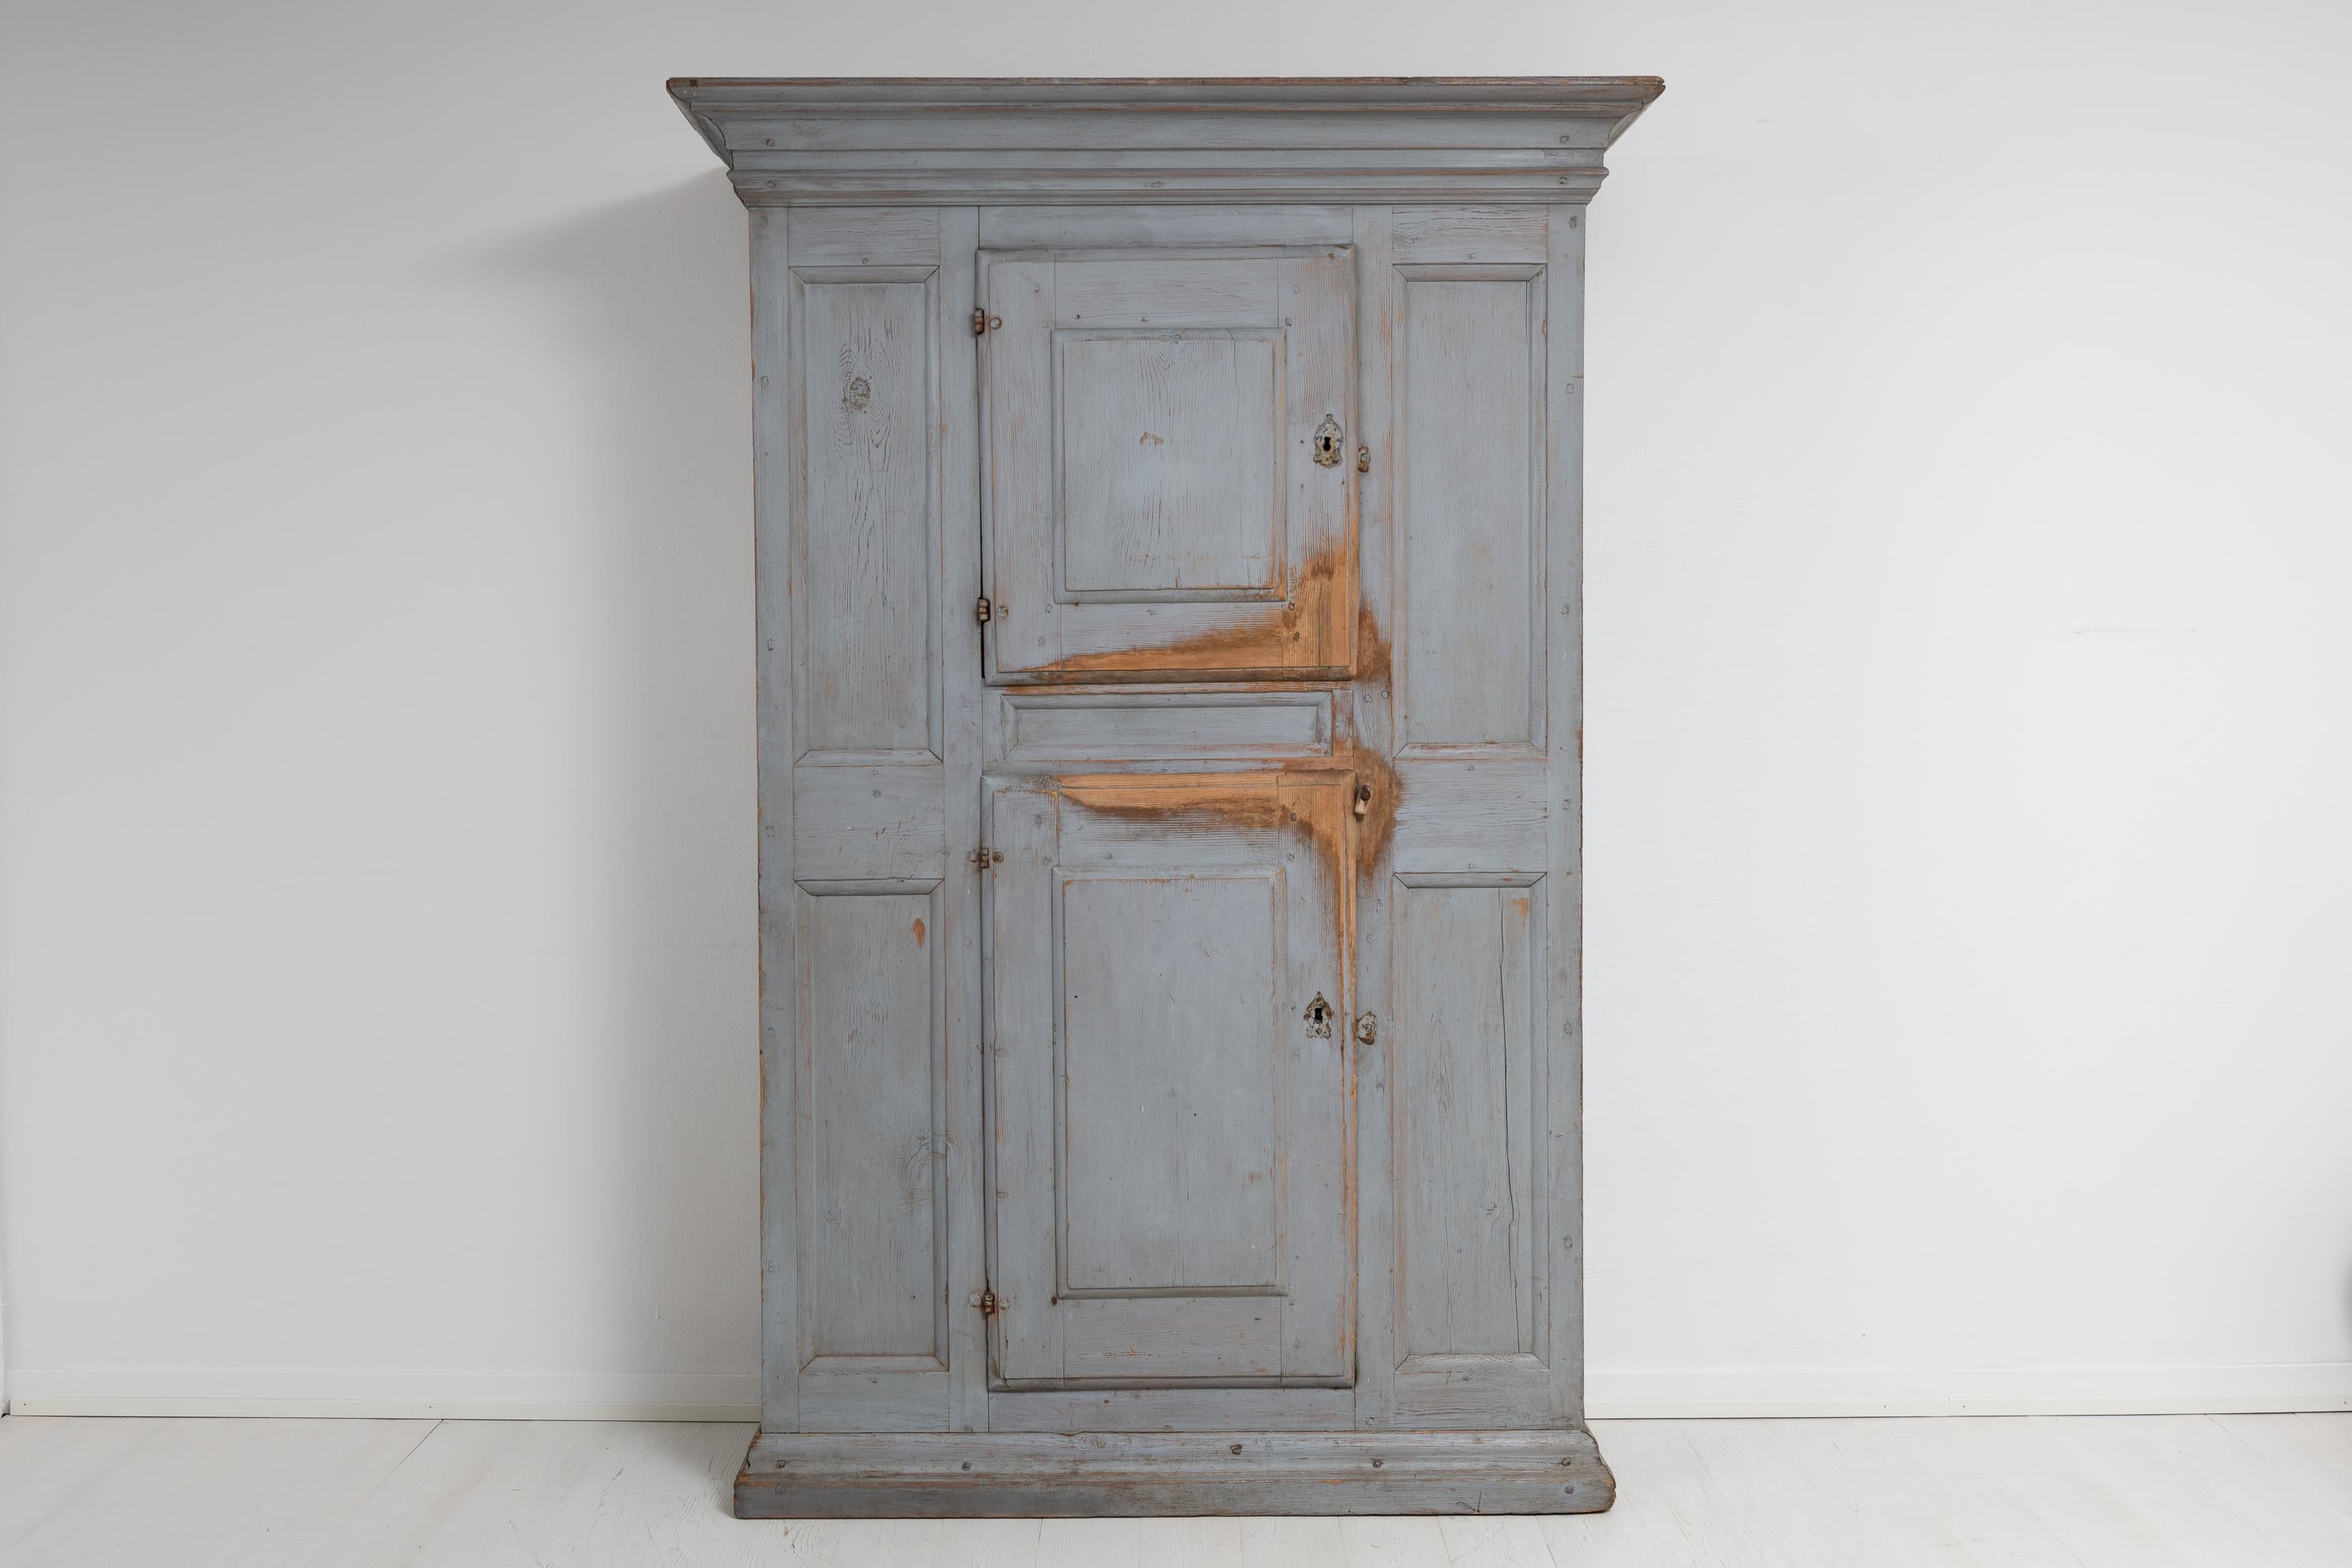 Mid 1700s Swedish Pine Painted Redwood Baroque Cabinet In Good Condition For Sale In Kramfors, SE